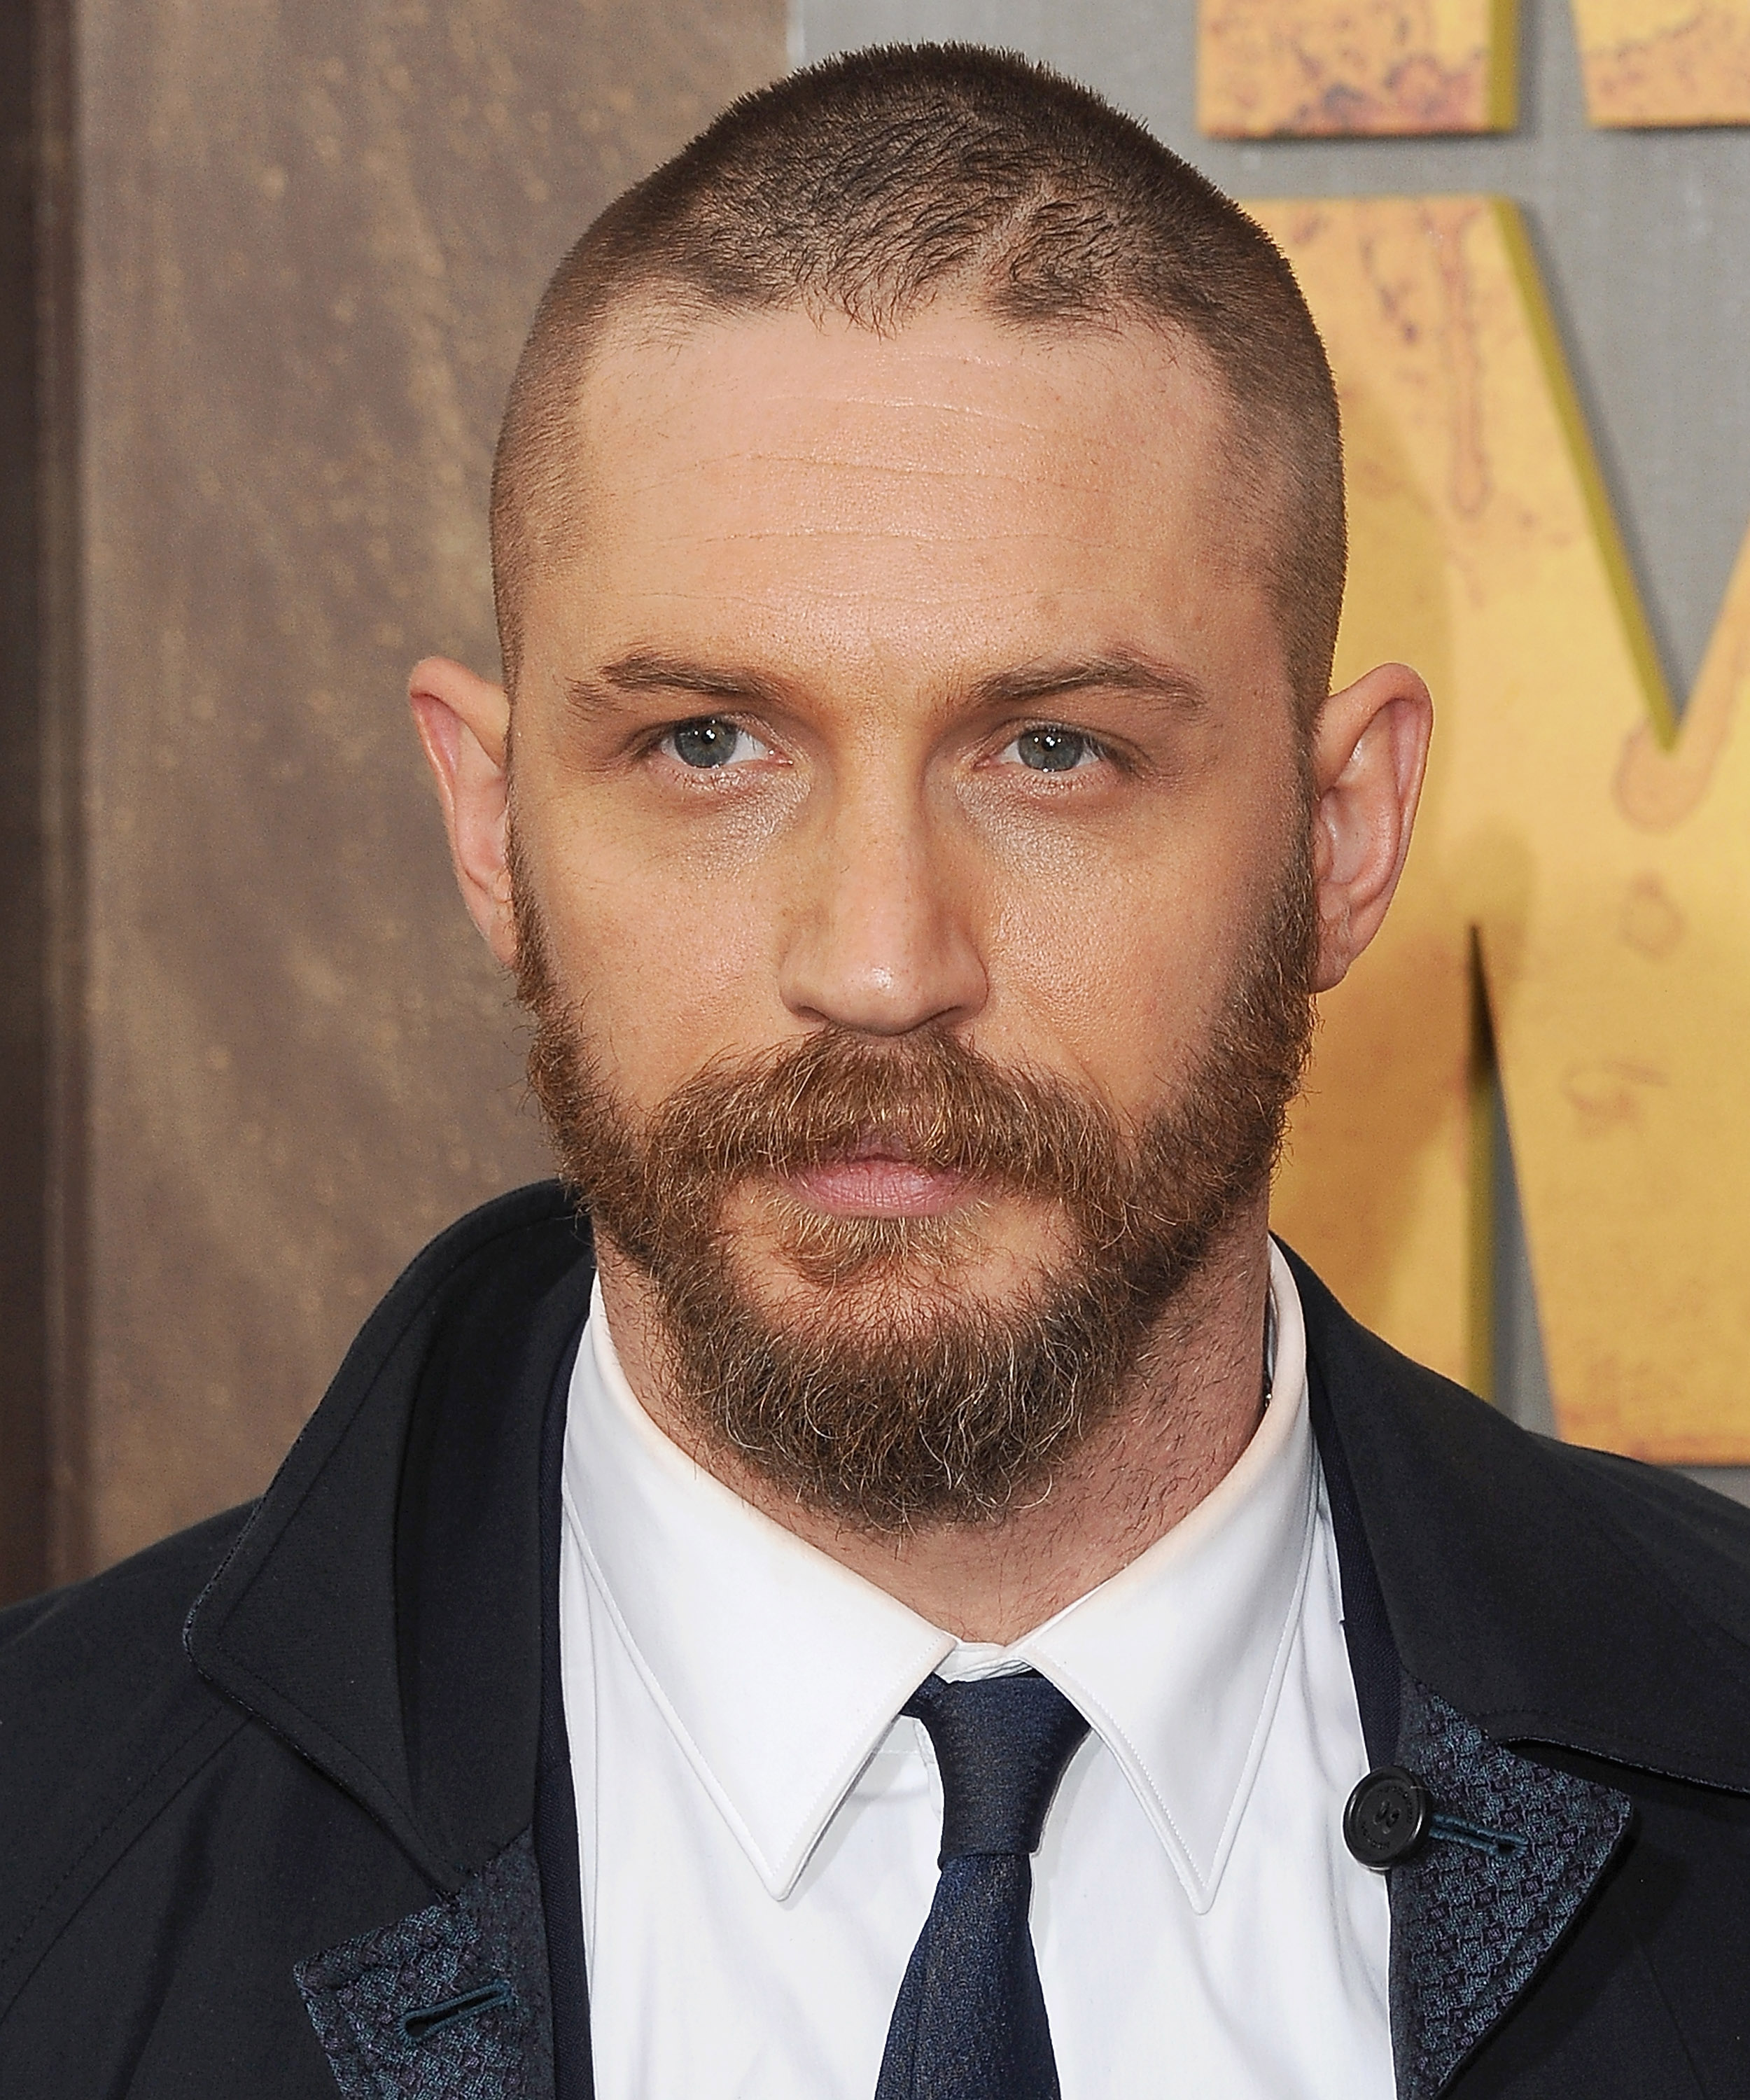 Actor Tom Hardy arrives at the Los Angeles Premiere of "Mad Max: Fury Road" at TCL Chinese Theatre IMAX on May 7, 2015 in Hollywood. (Jon Kopaloff—FilmMagic/Getty Images)